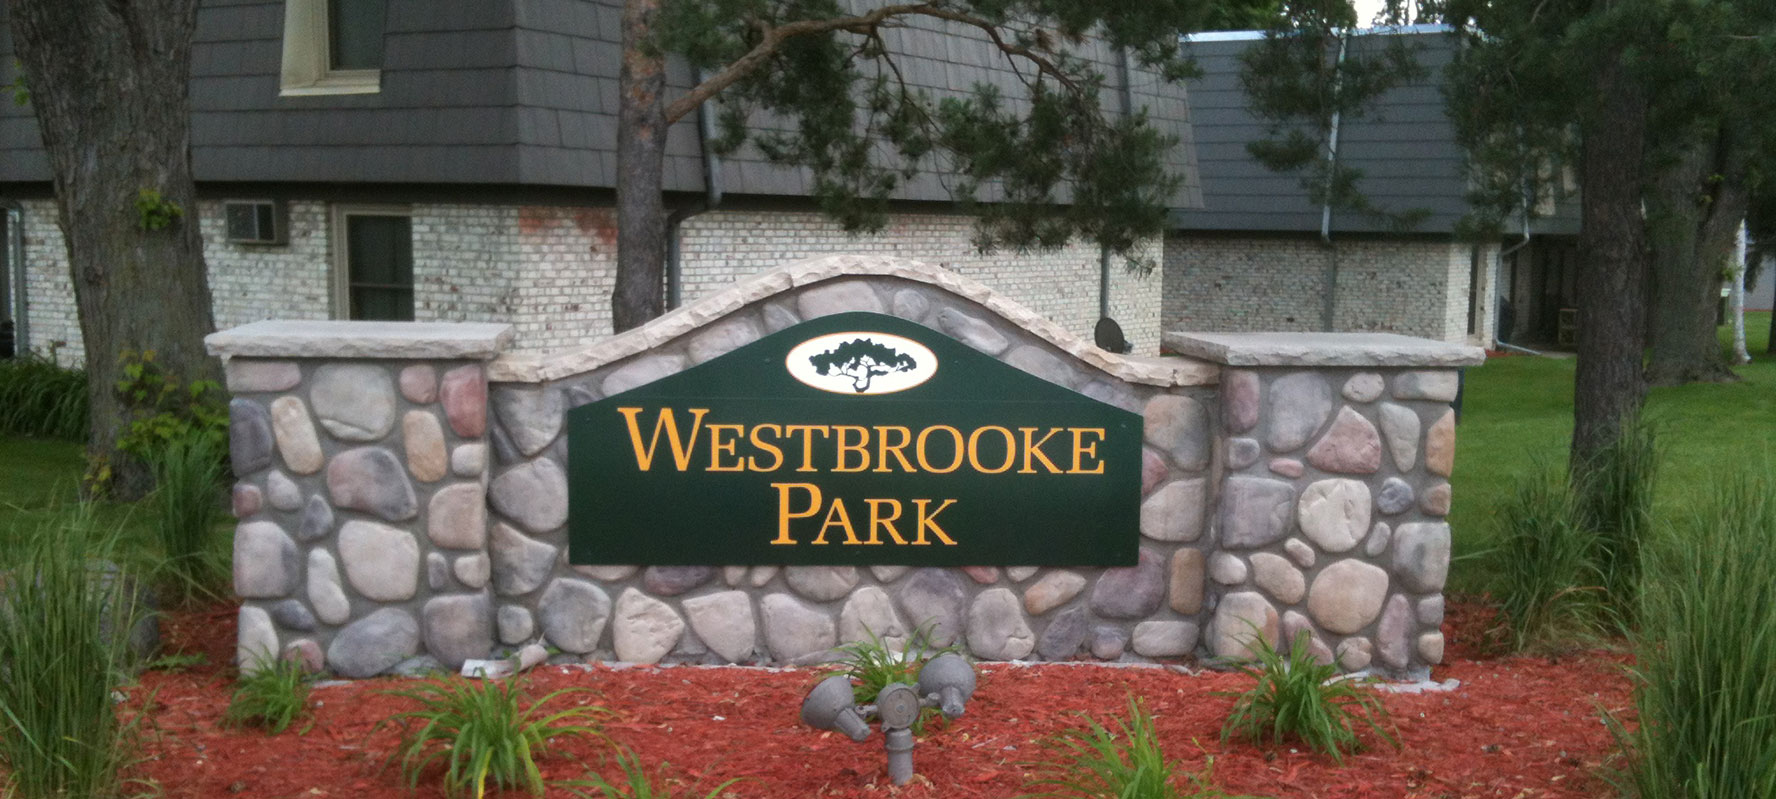 Building sign for Westbrooke, Minnesota signs